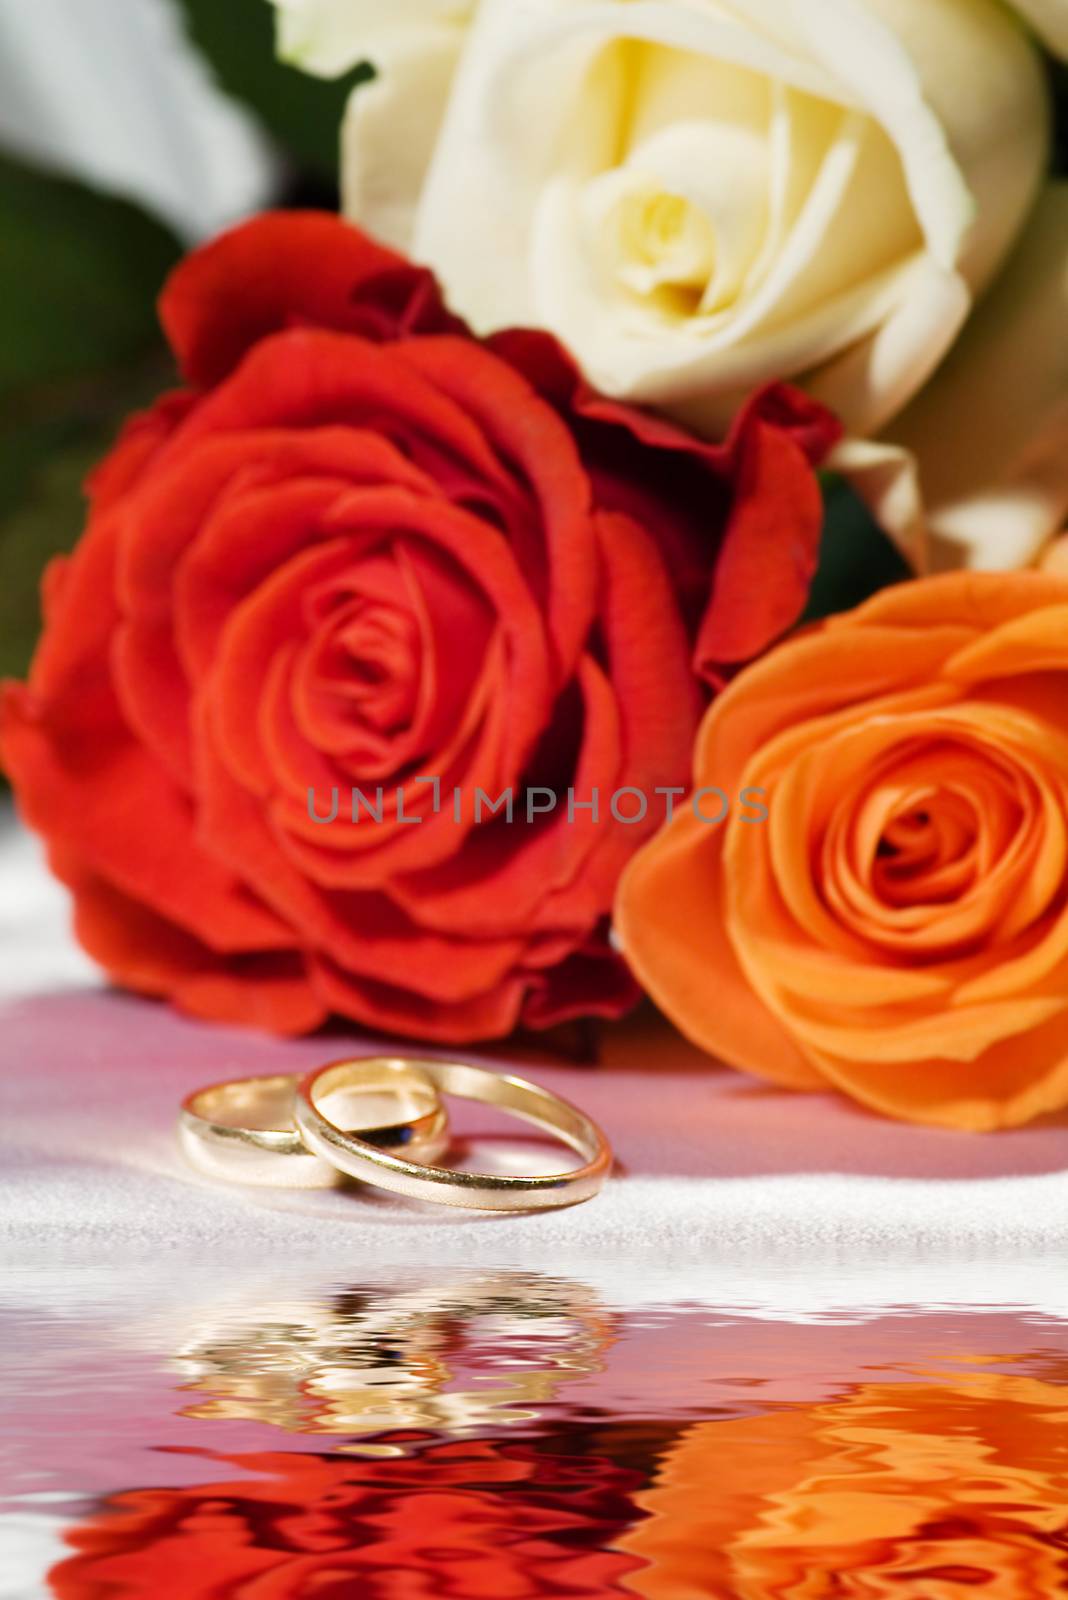 On a photo a roses and wedding rings

